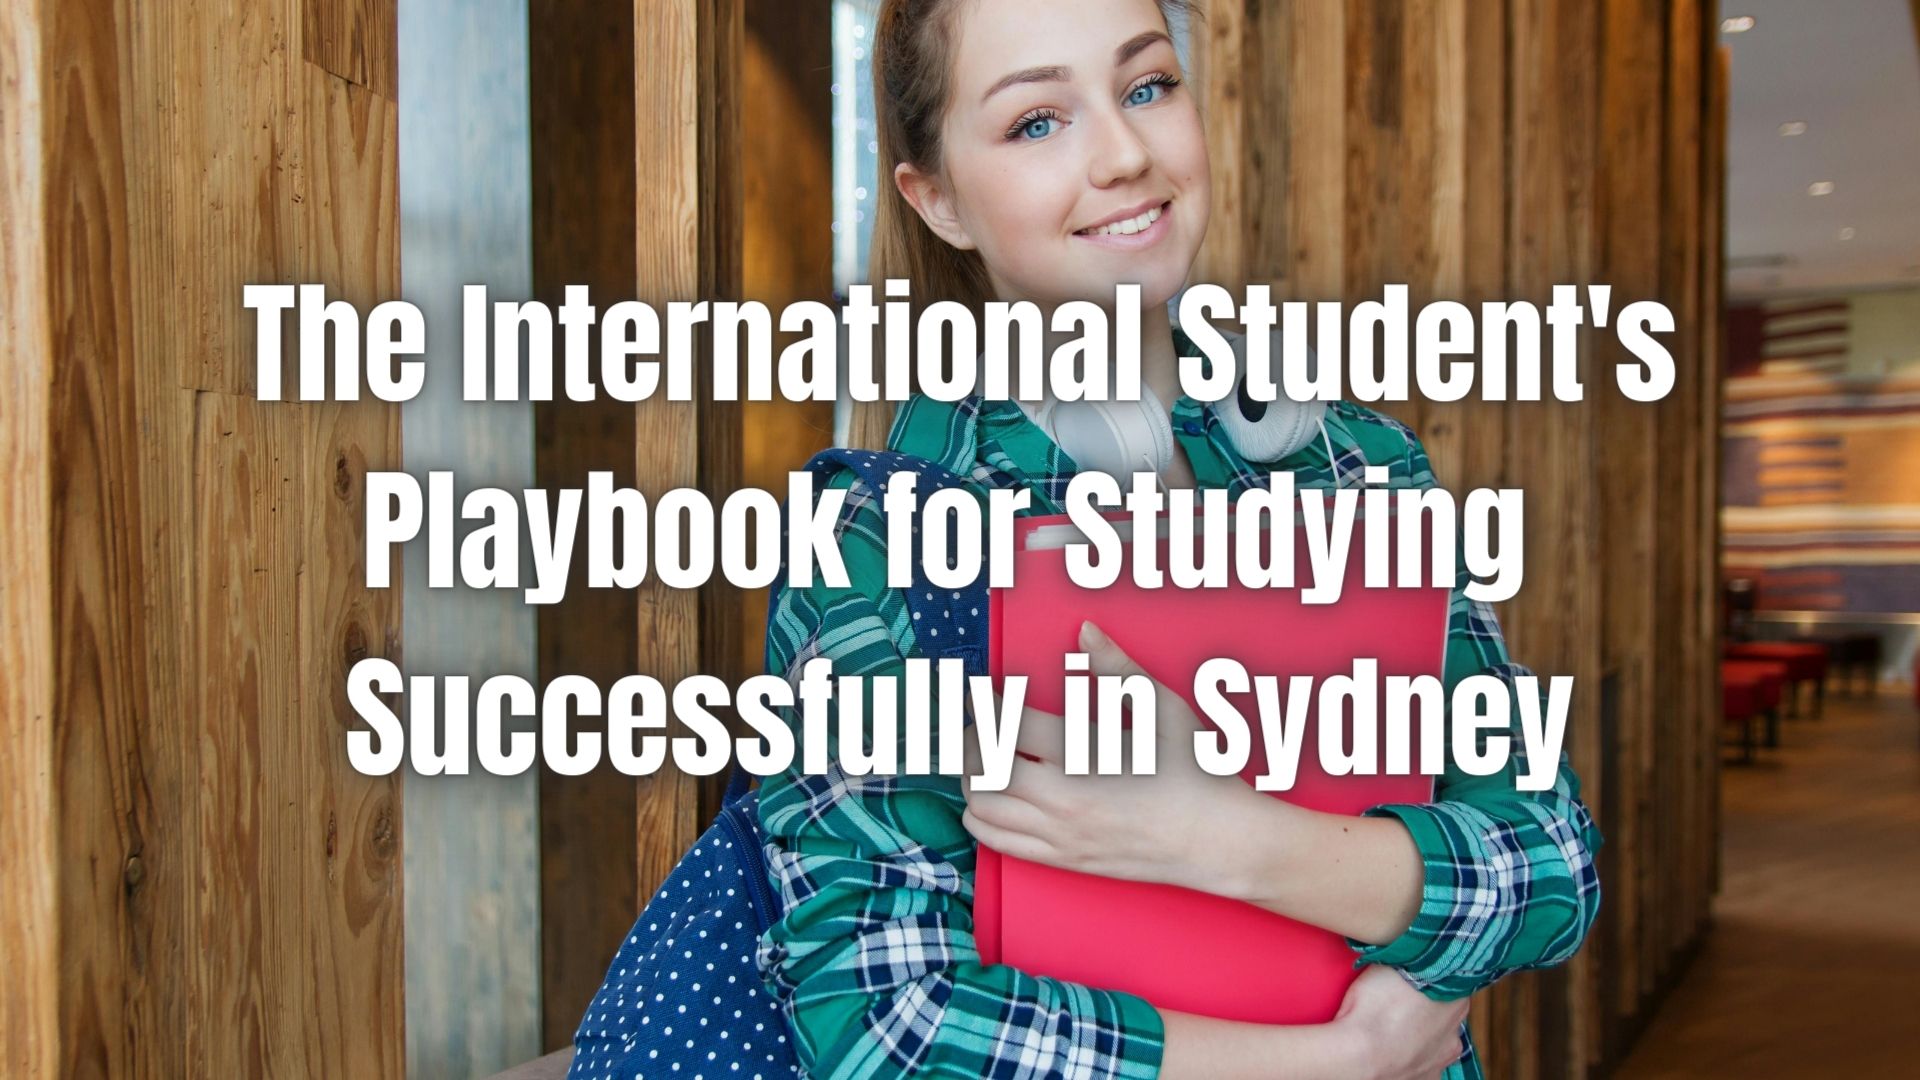 Thinking of studying in Sydney? This essential guide unlocks success! Learn pro tips, conquer challenges & thrive.